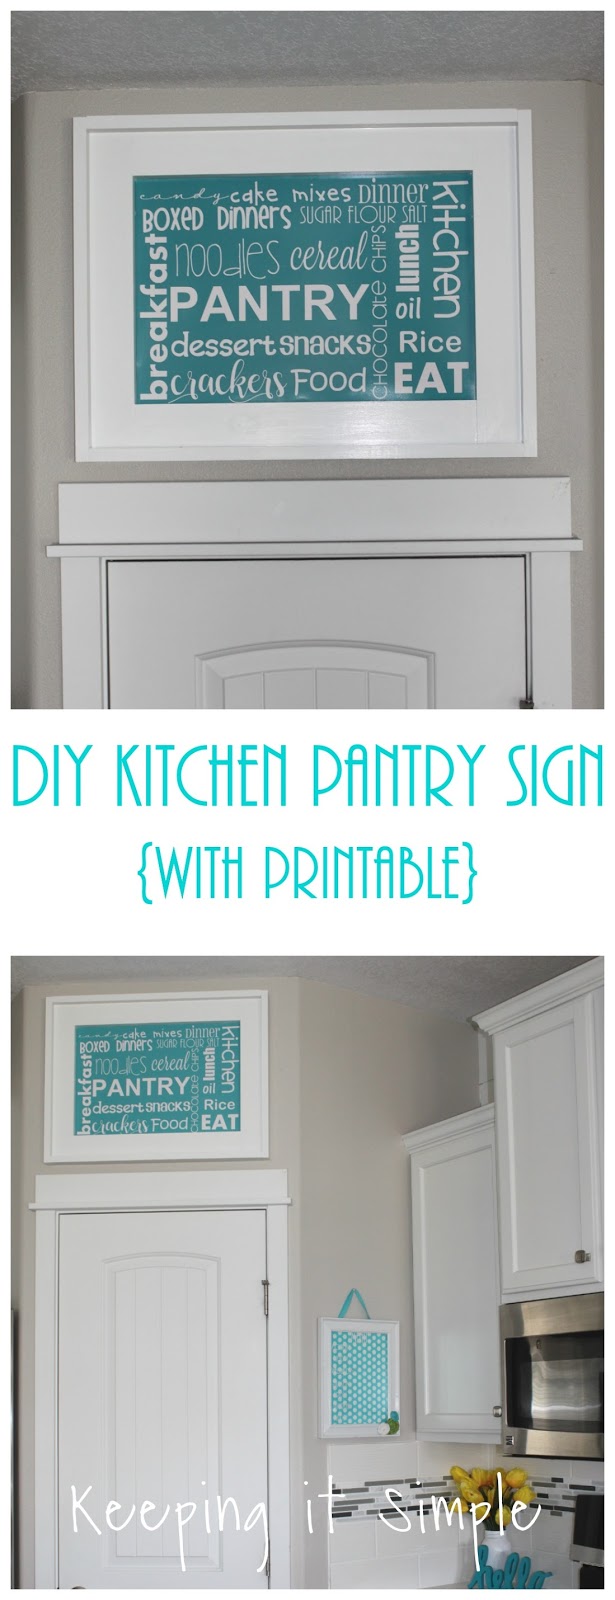 DIY Kitchen Pantry Sign with Subway Art Printable - Keeping it Simple